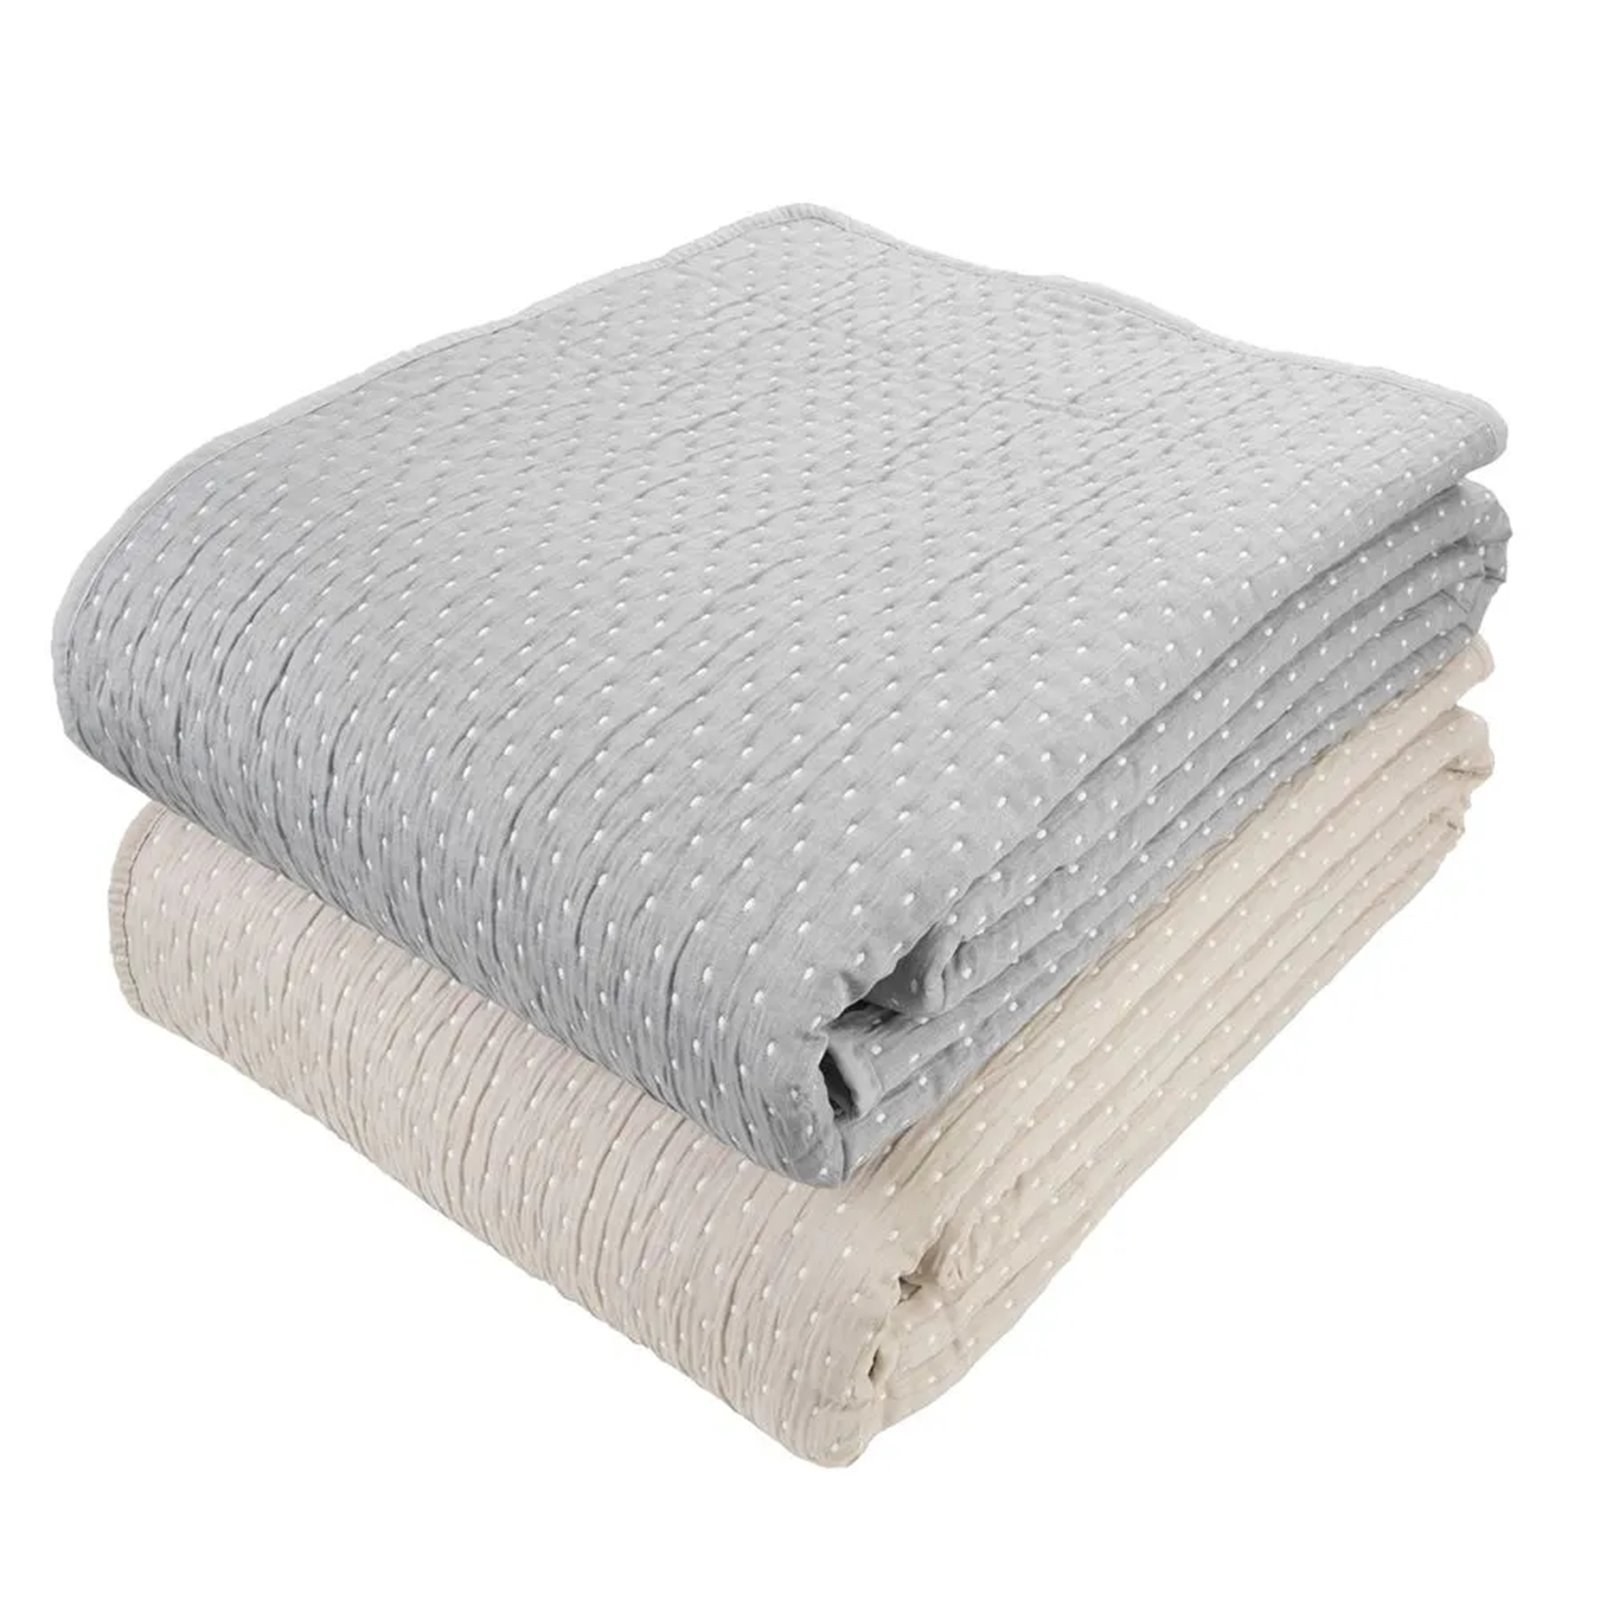 Grey and White Spot Stitch Bedspread (King) Image